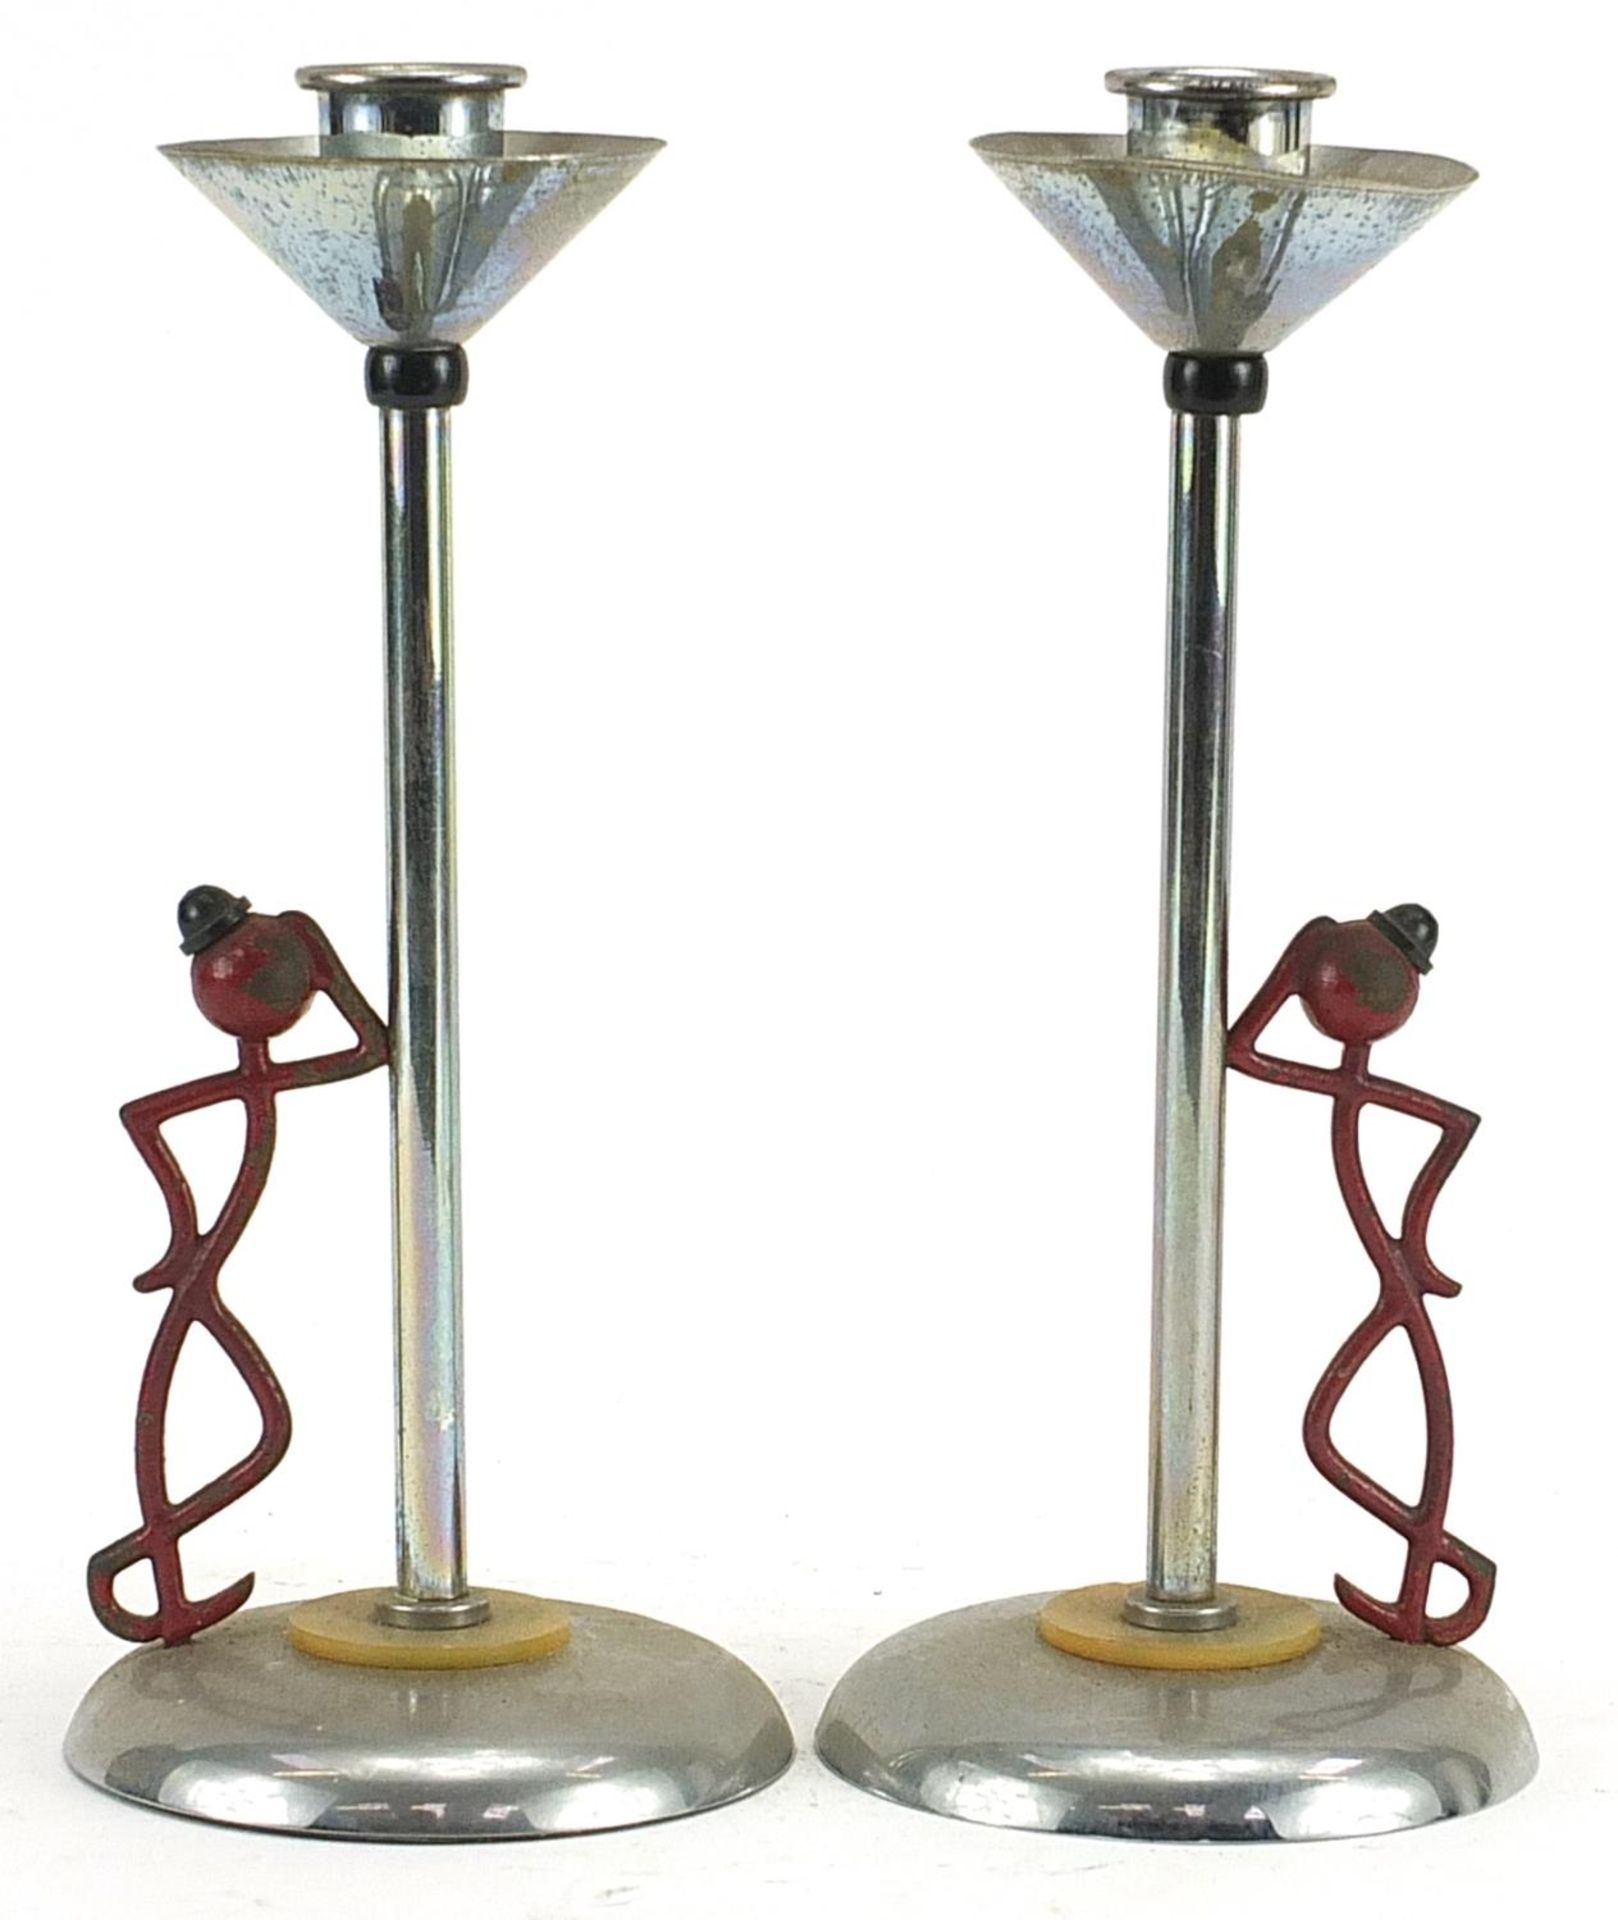 Pair of Art Deco partially painted chrome candlesticks in the form of a figure leaning against a